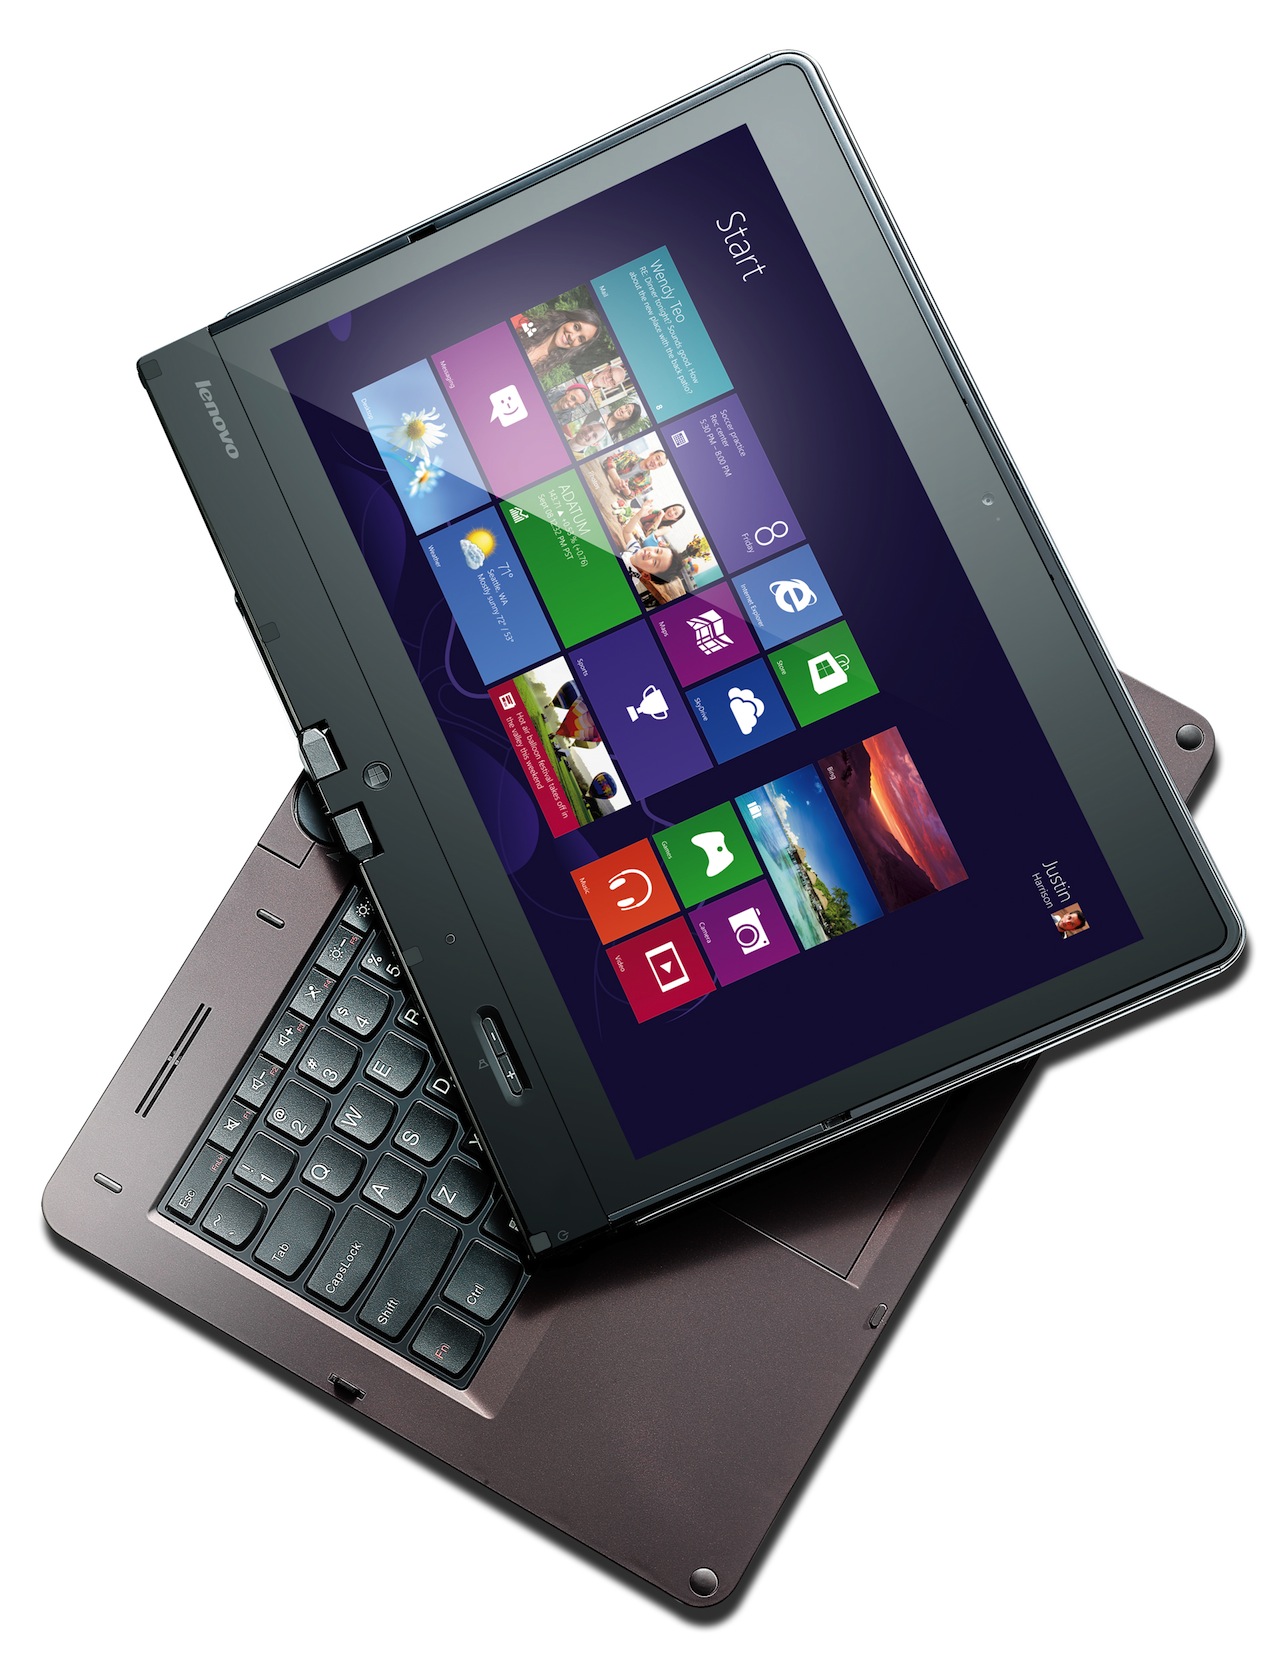 Lenovo unveils slew of tablets with keyboards, laptops with touchscreens |  Ars Technica